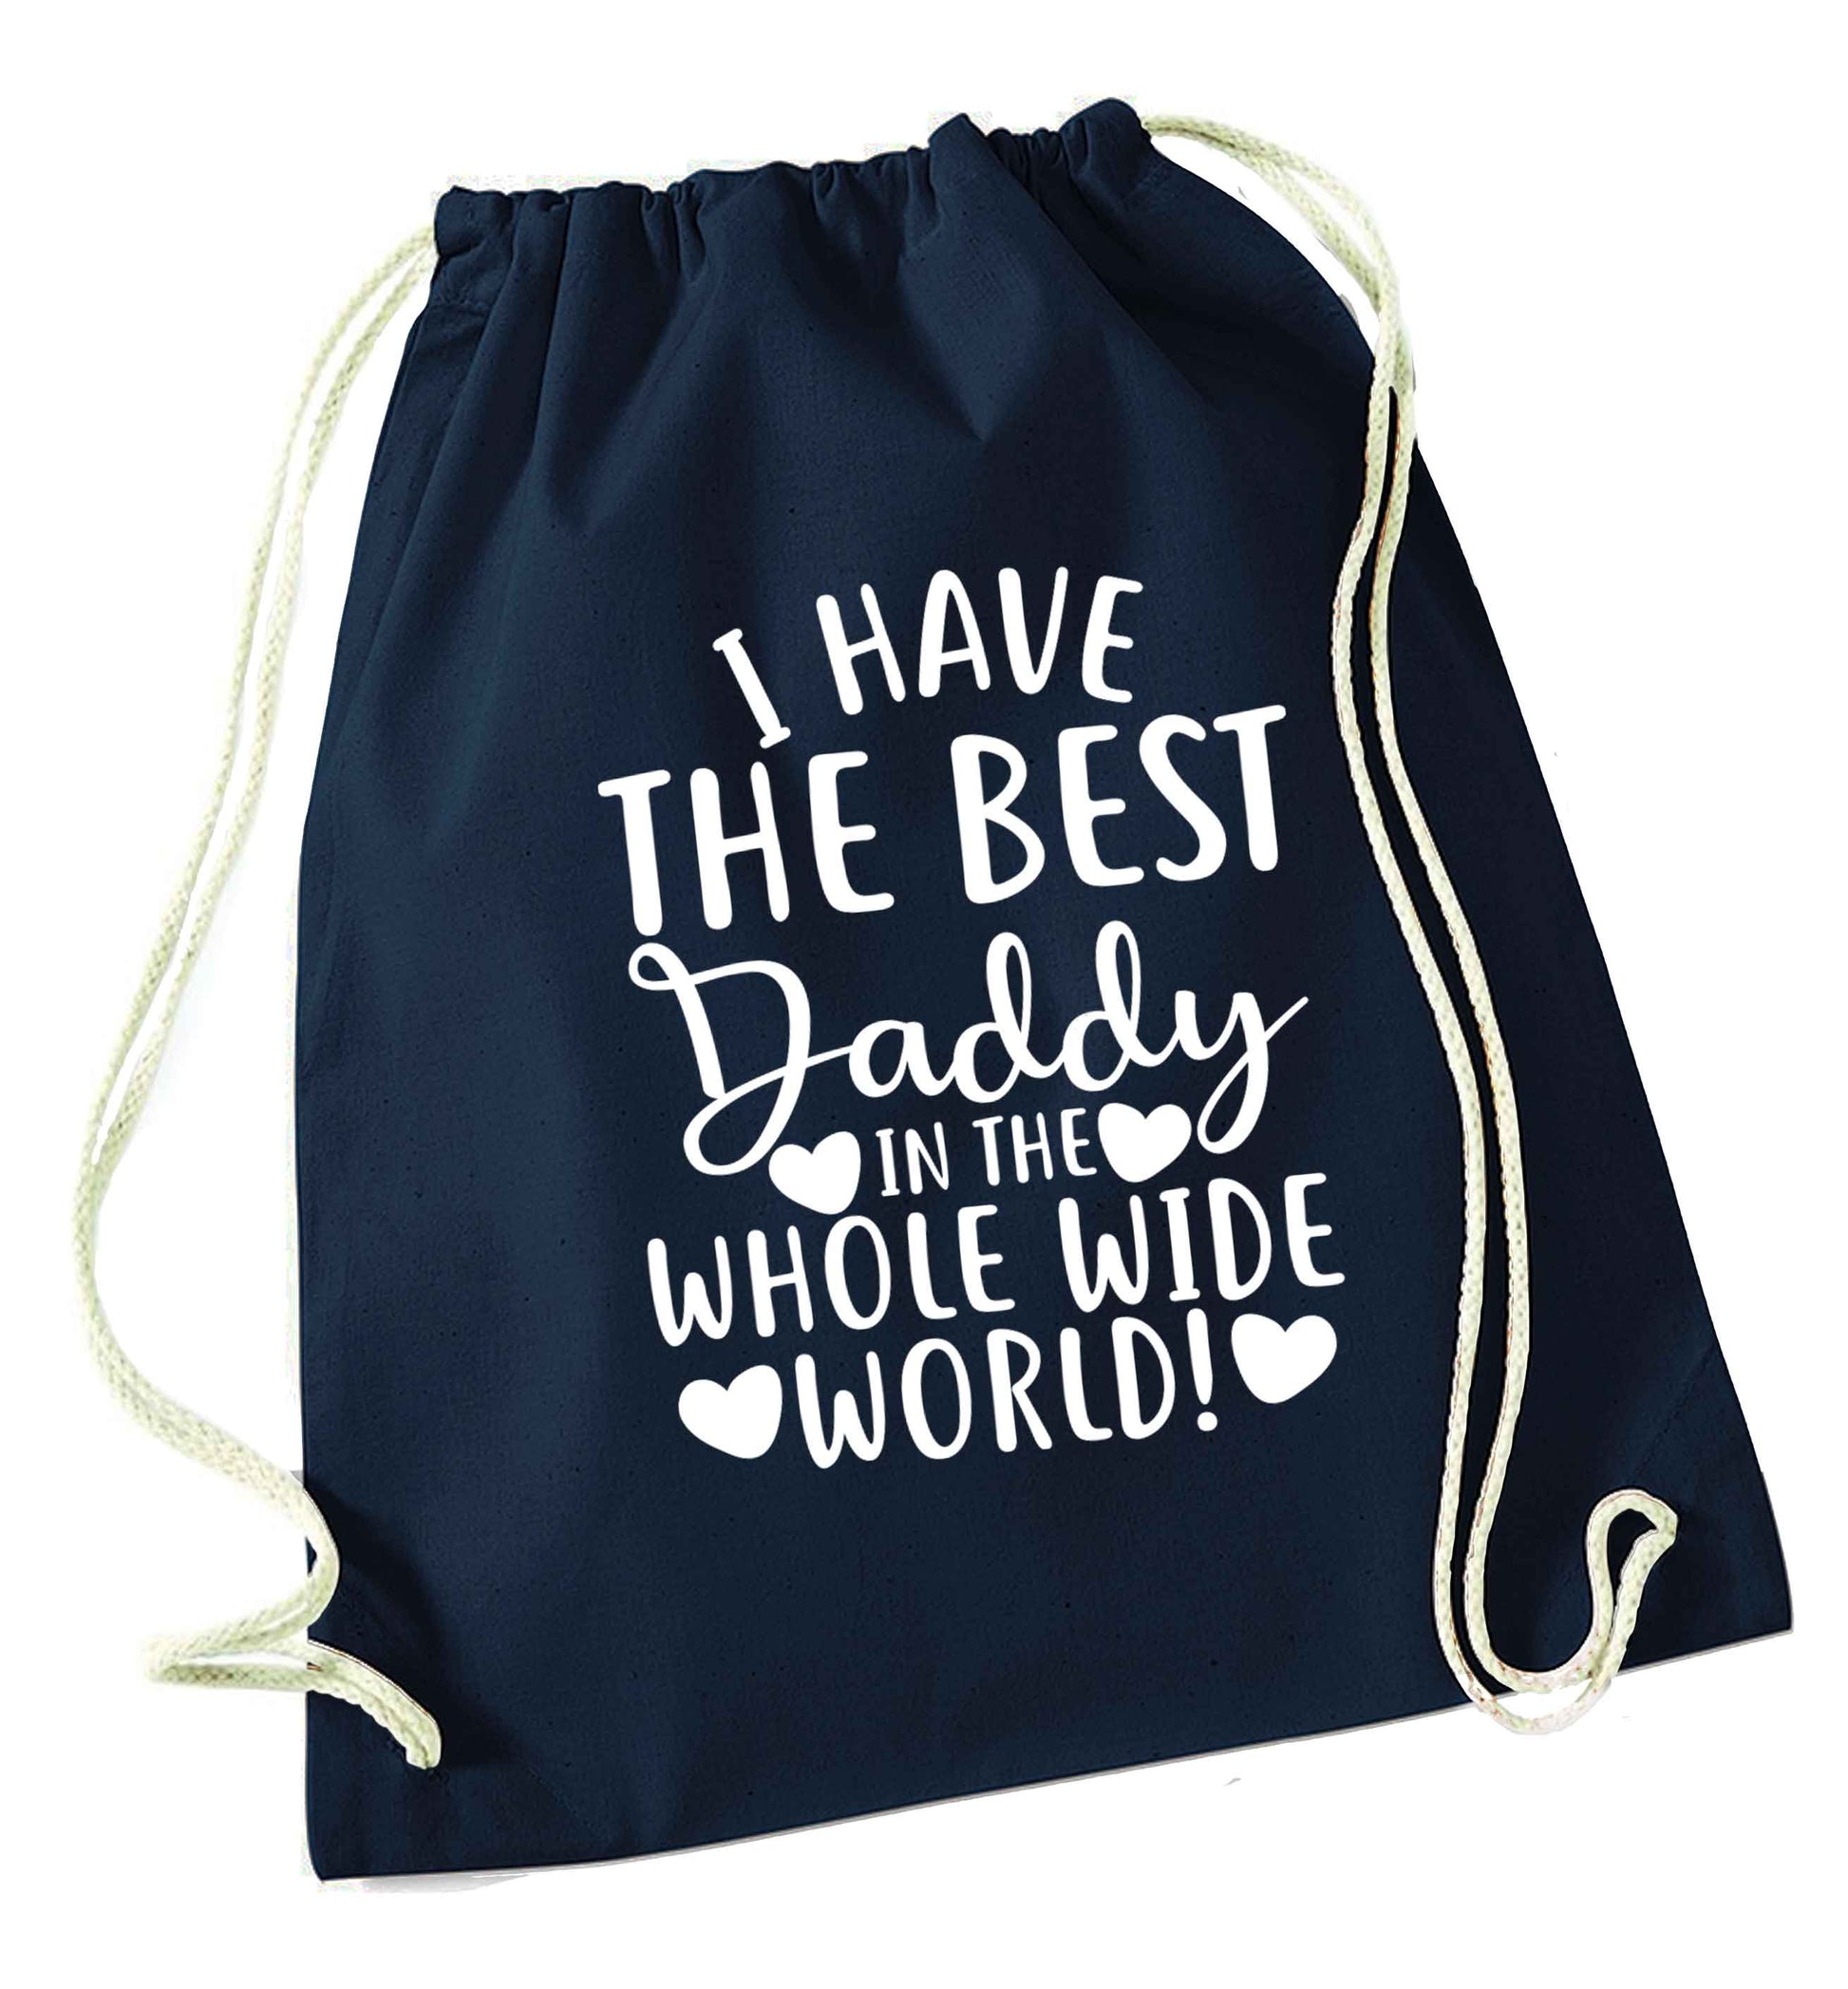 I have the best daddy in the whole wide world navy drawstring bag